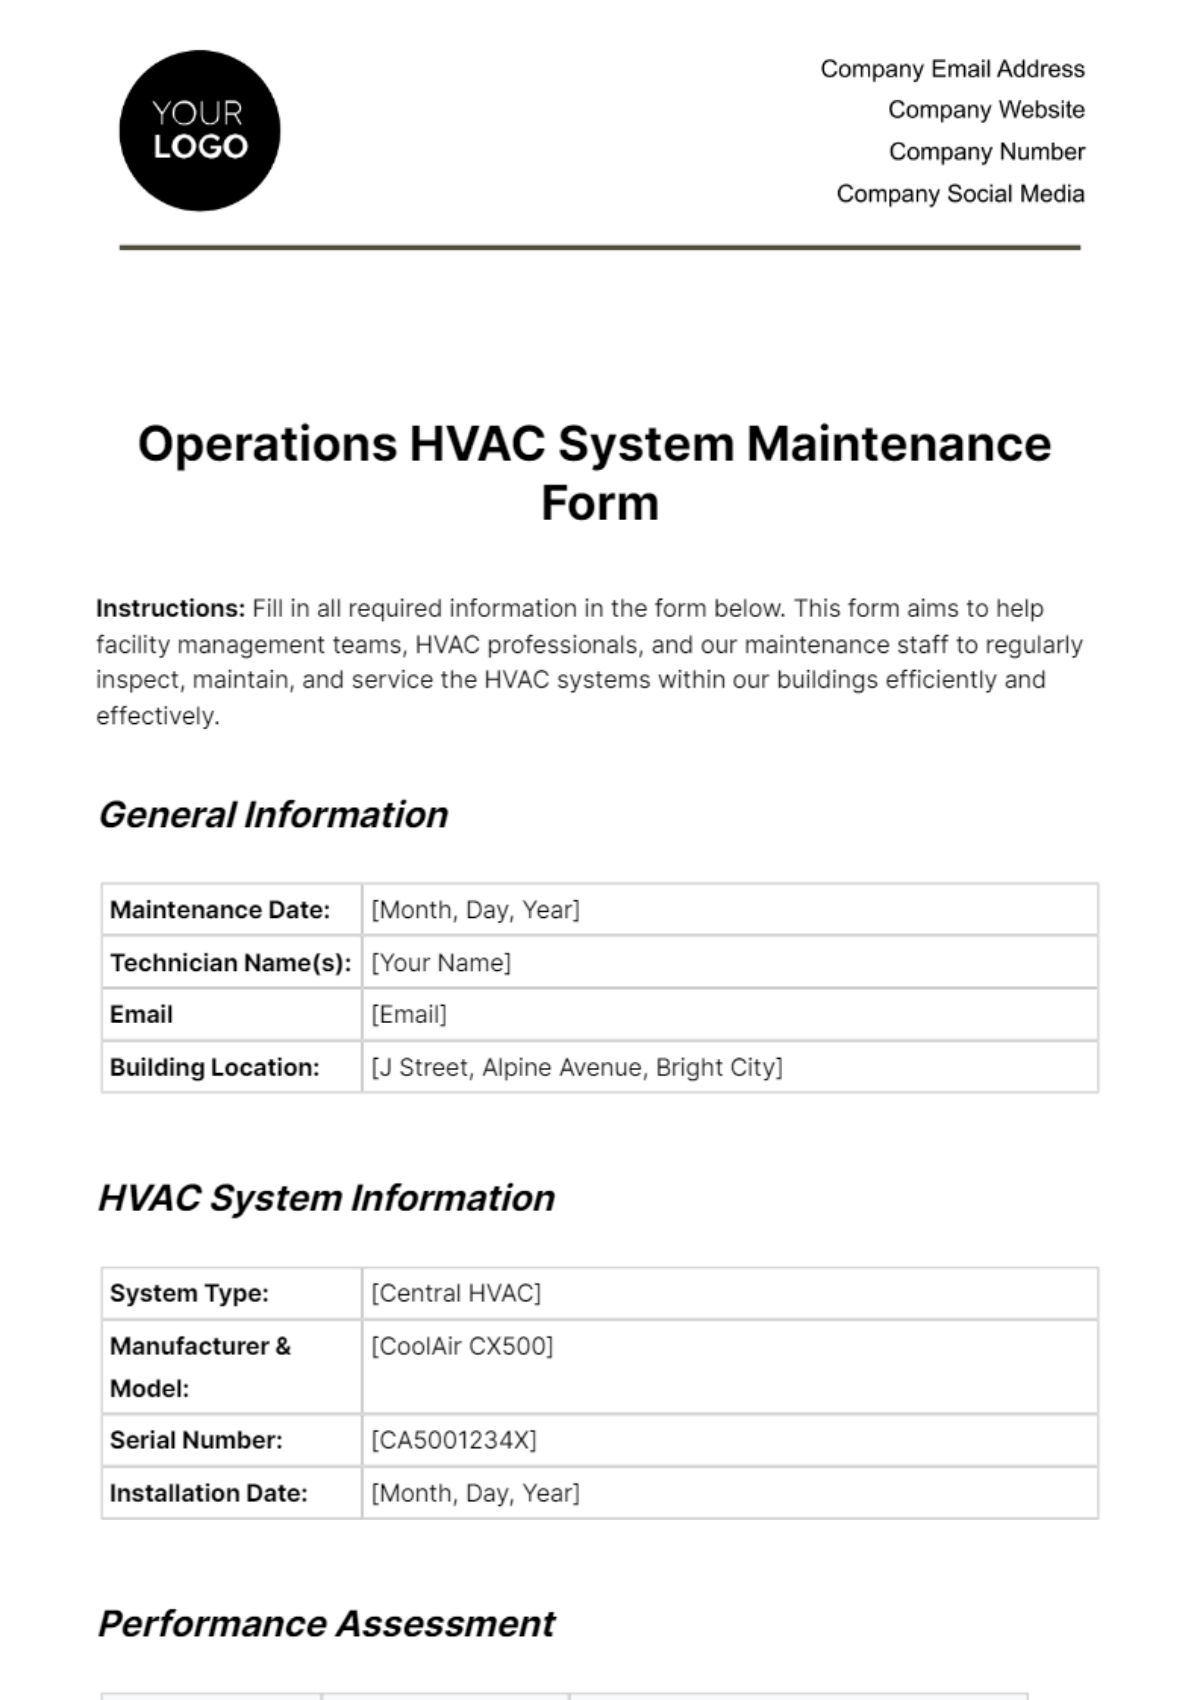 Free Operations HVAC System Maintenance Form Template